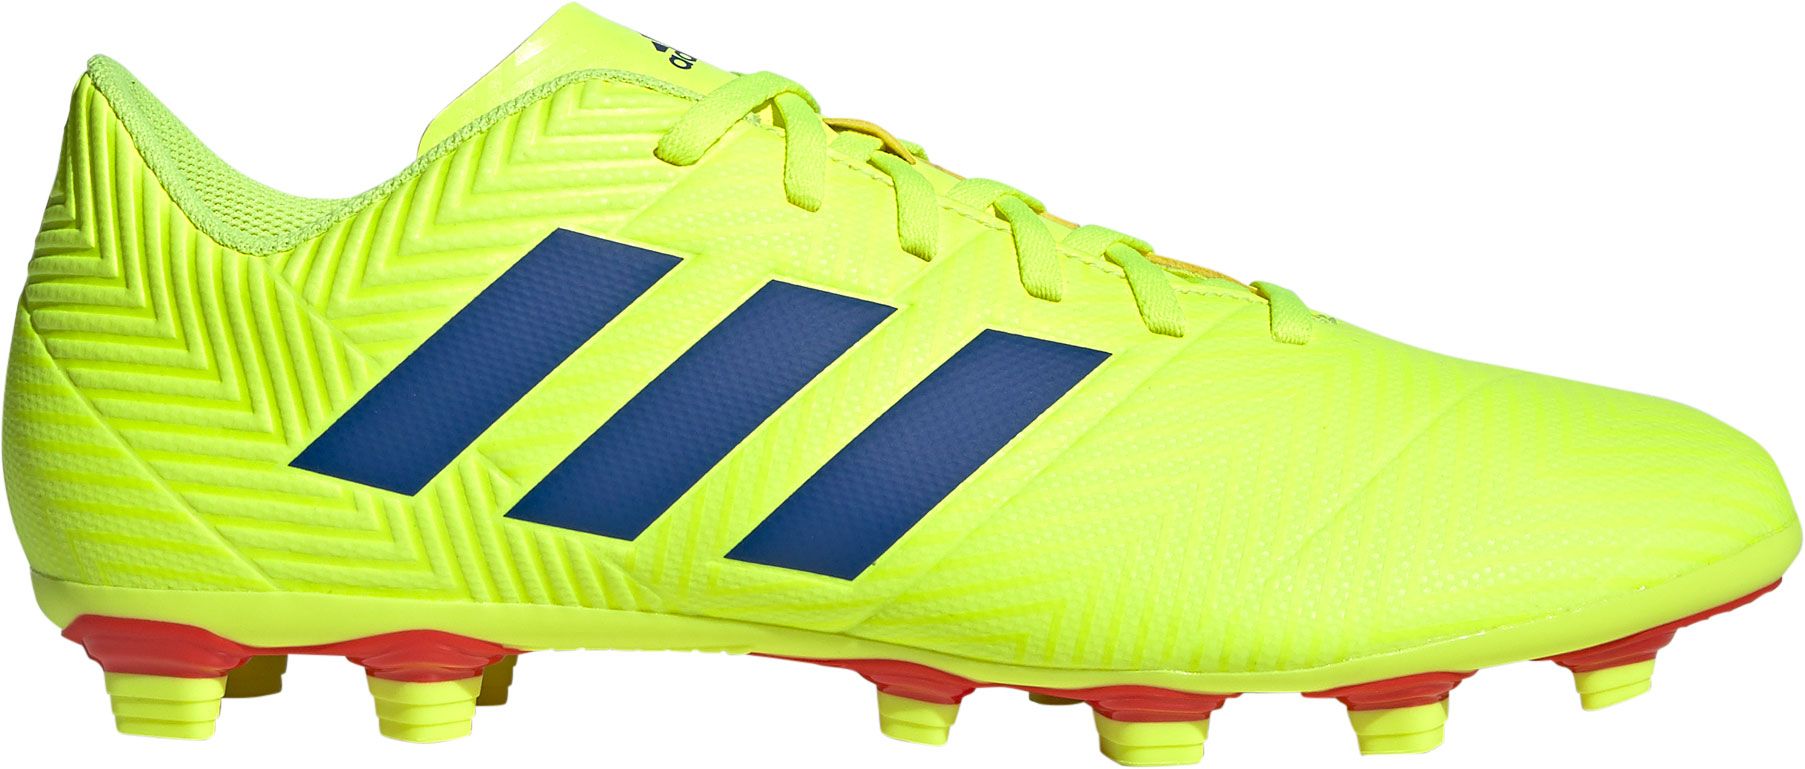 messi yellow cleats